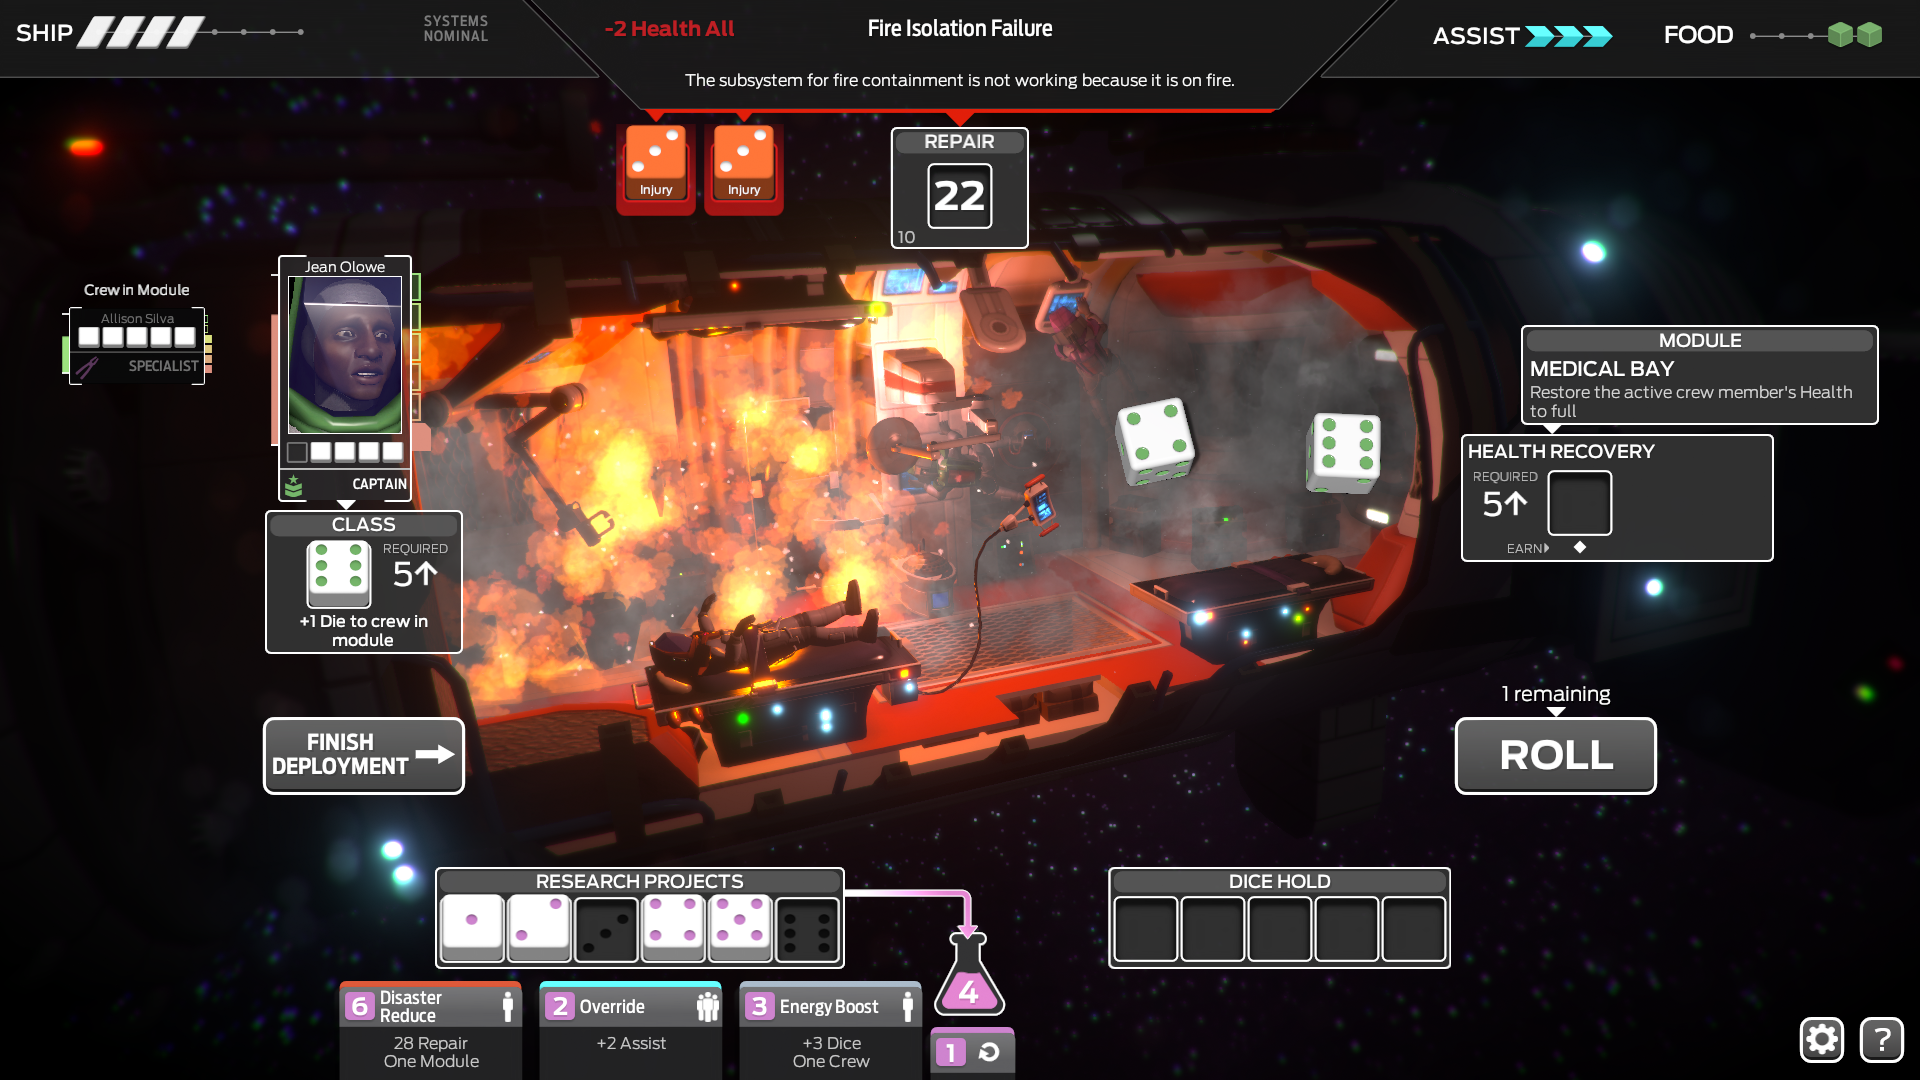 tharsis_screen_1_0.png